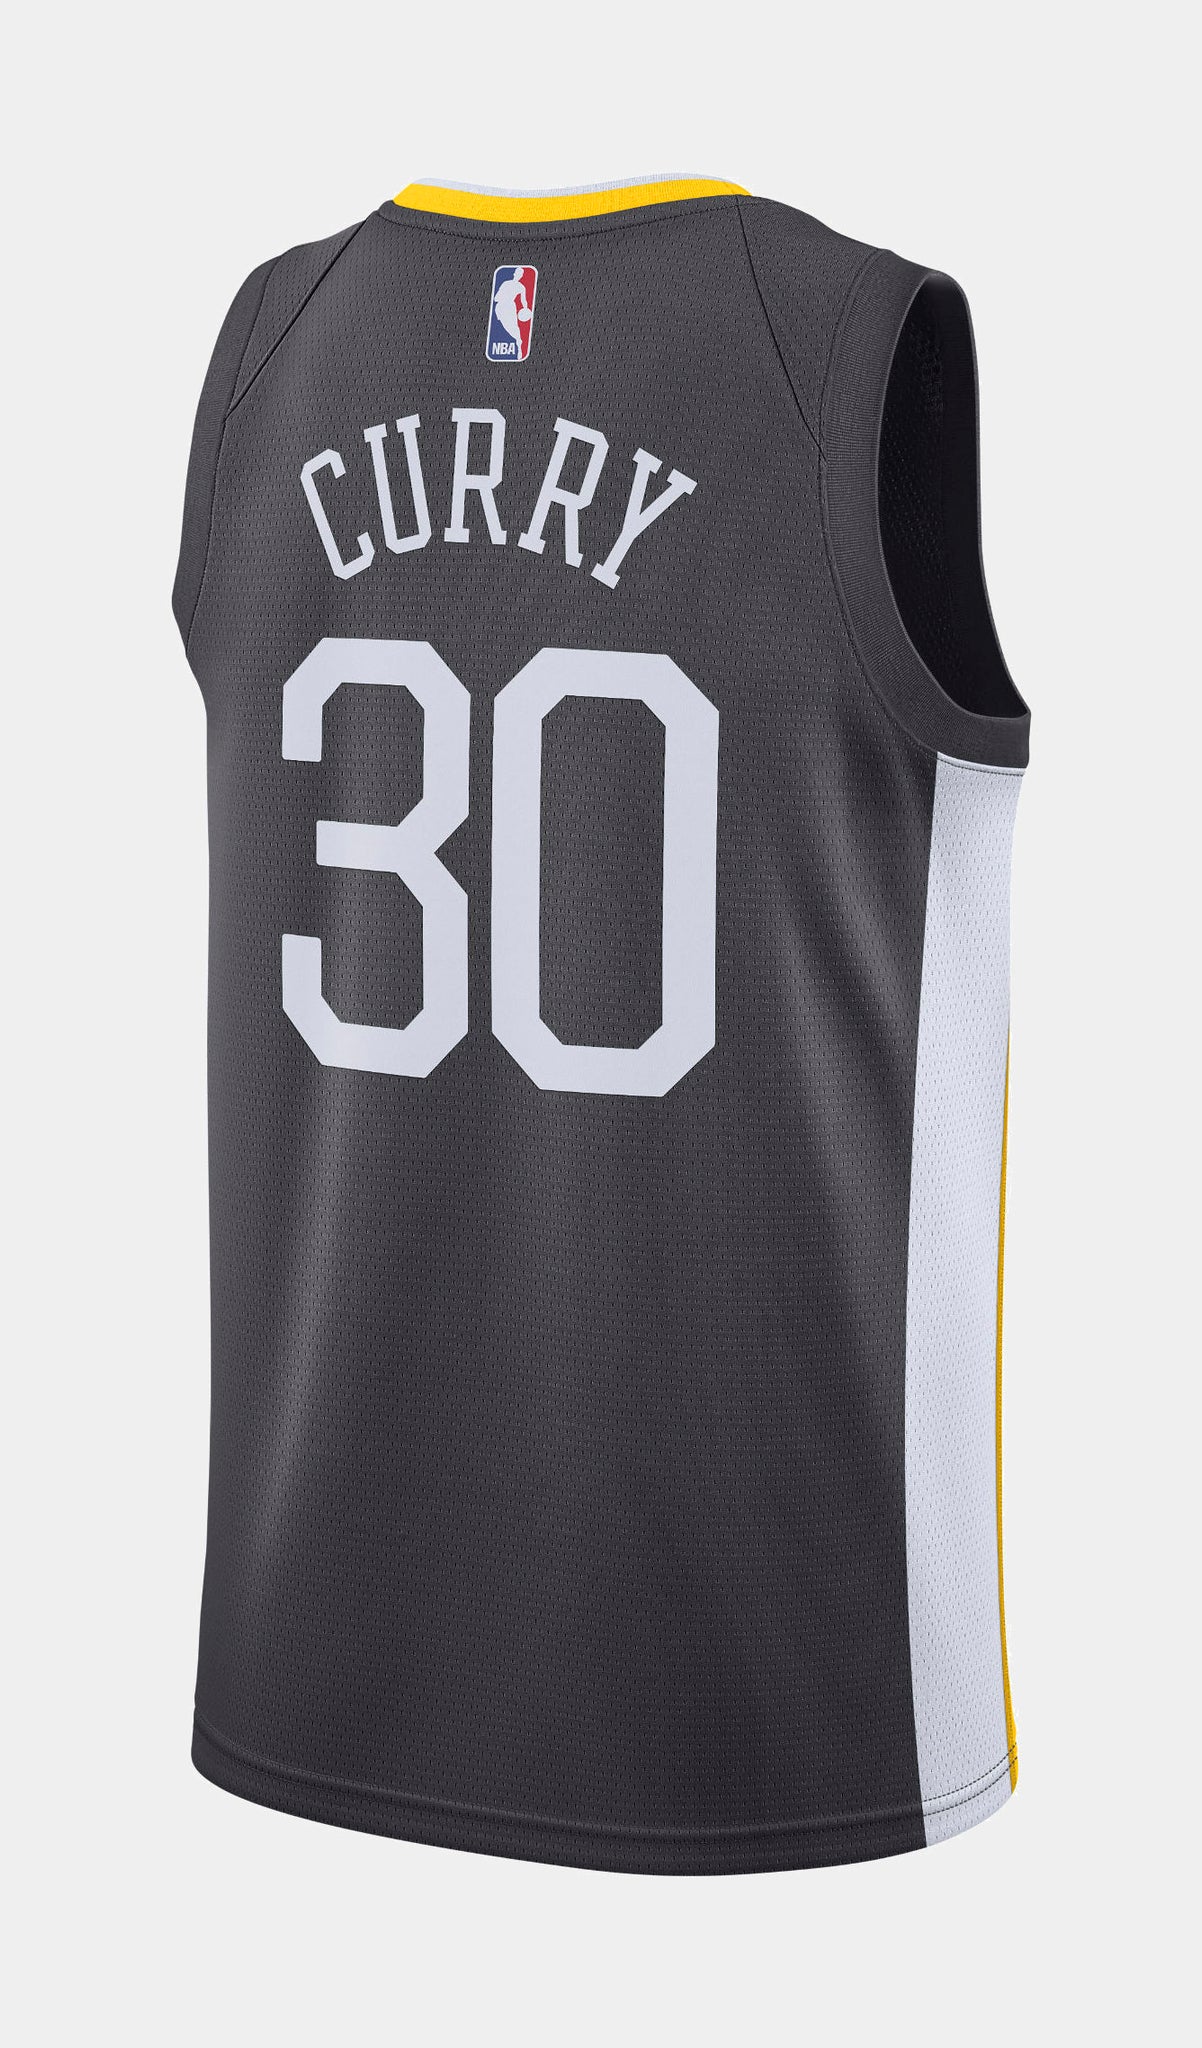 AT4705-100] Mens Nike NBA GS Warriors Stephen Curry White